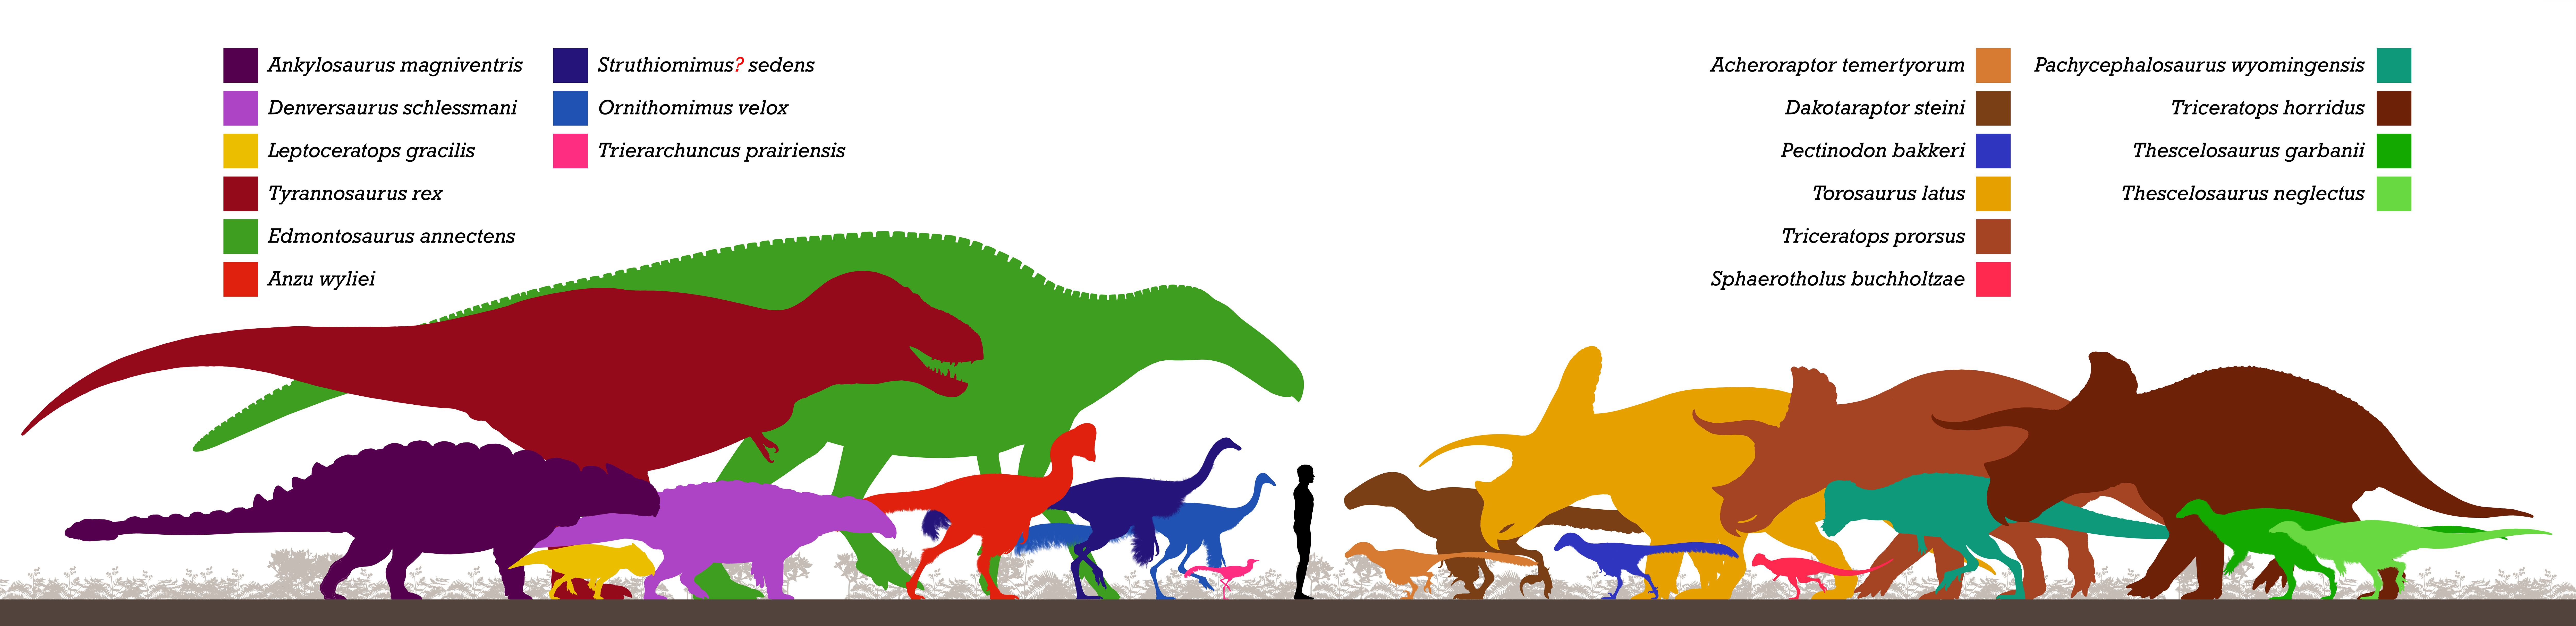 diagram showing species made extinct from the event